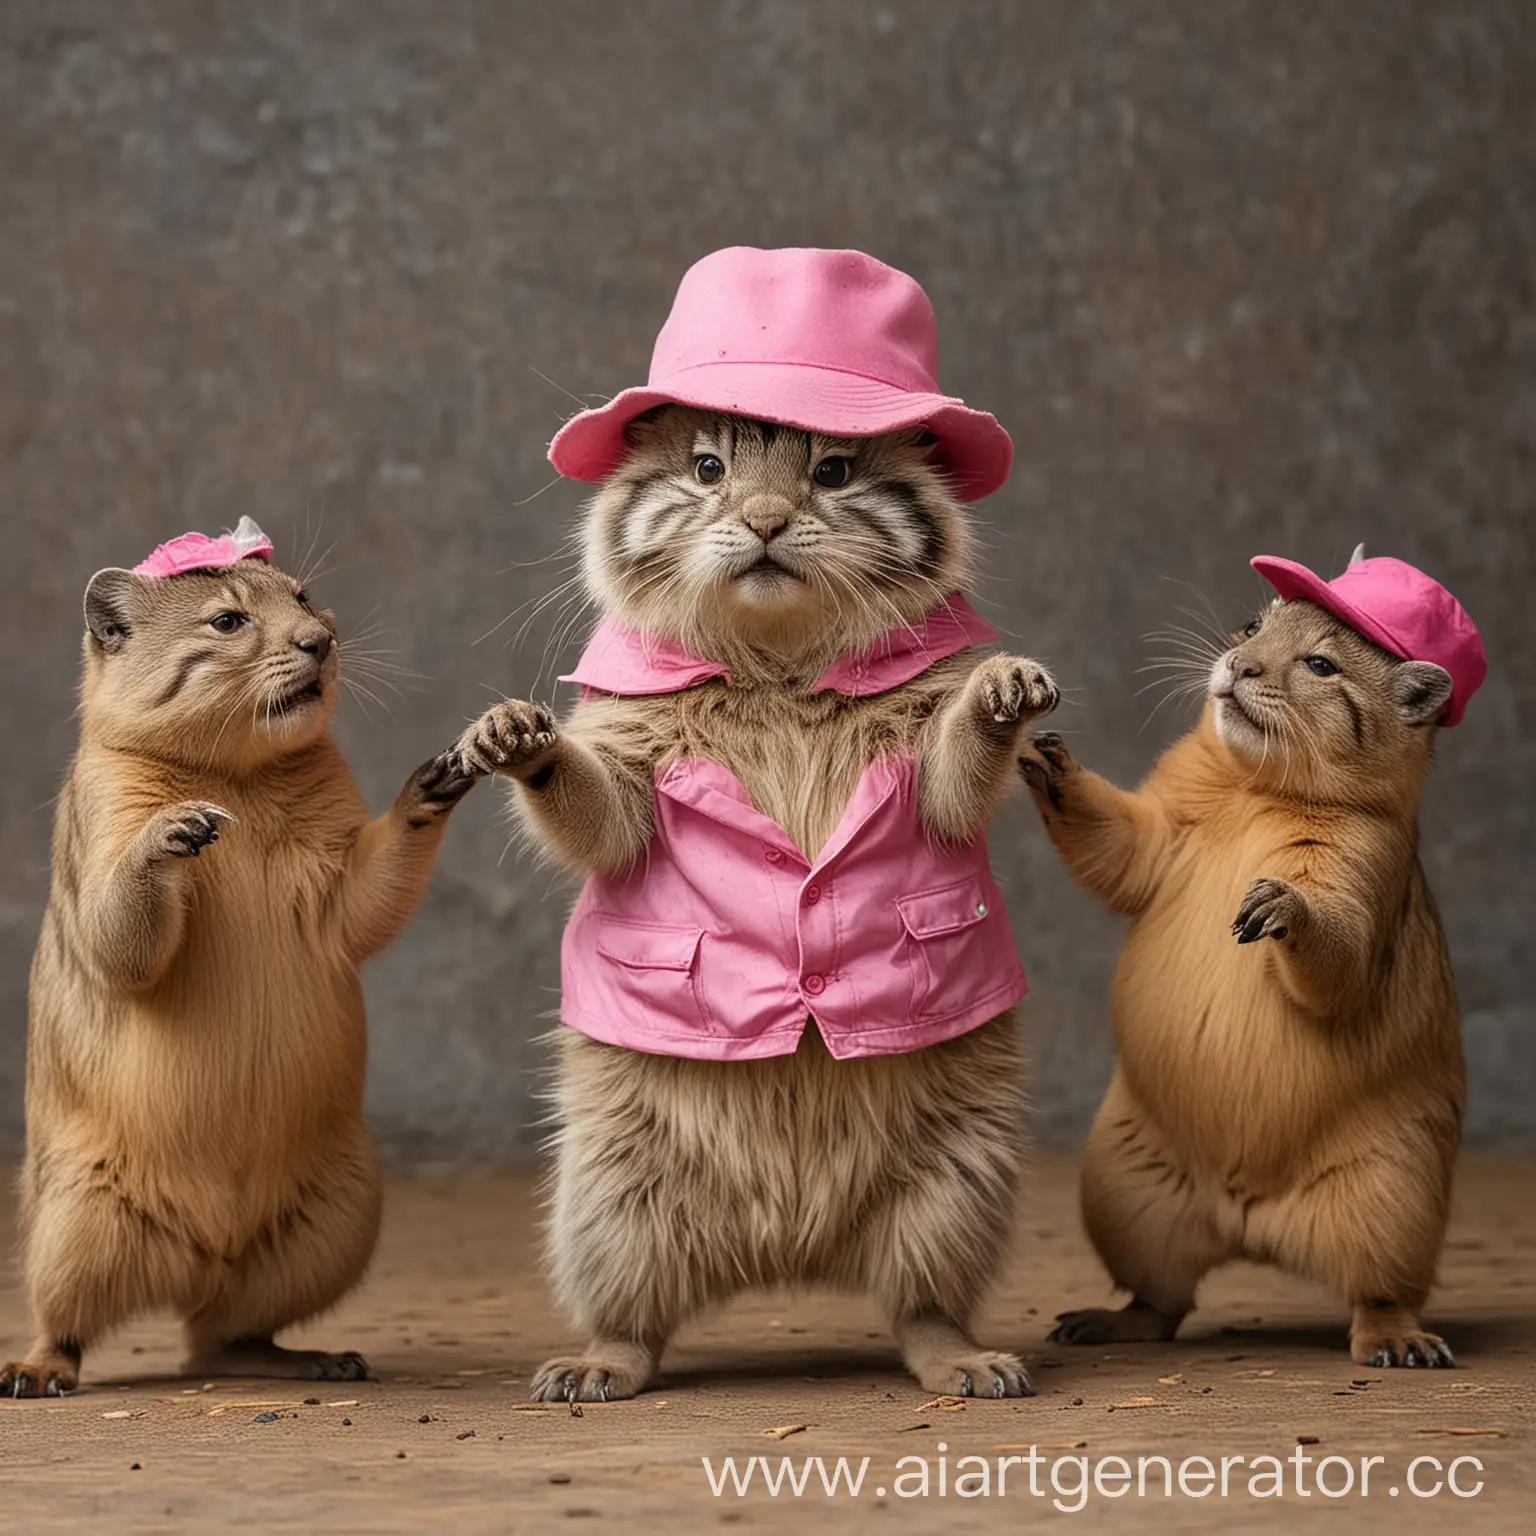 Wild pallas cat in pink hat dancing with a capybara